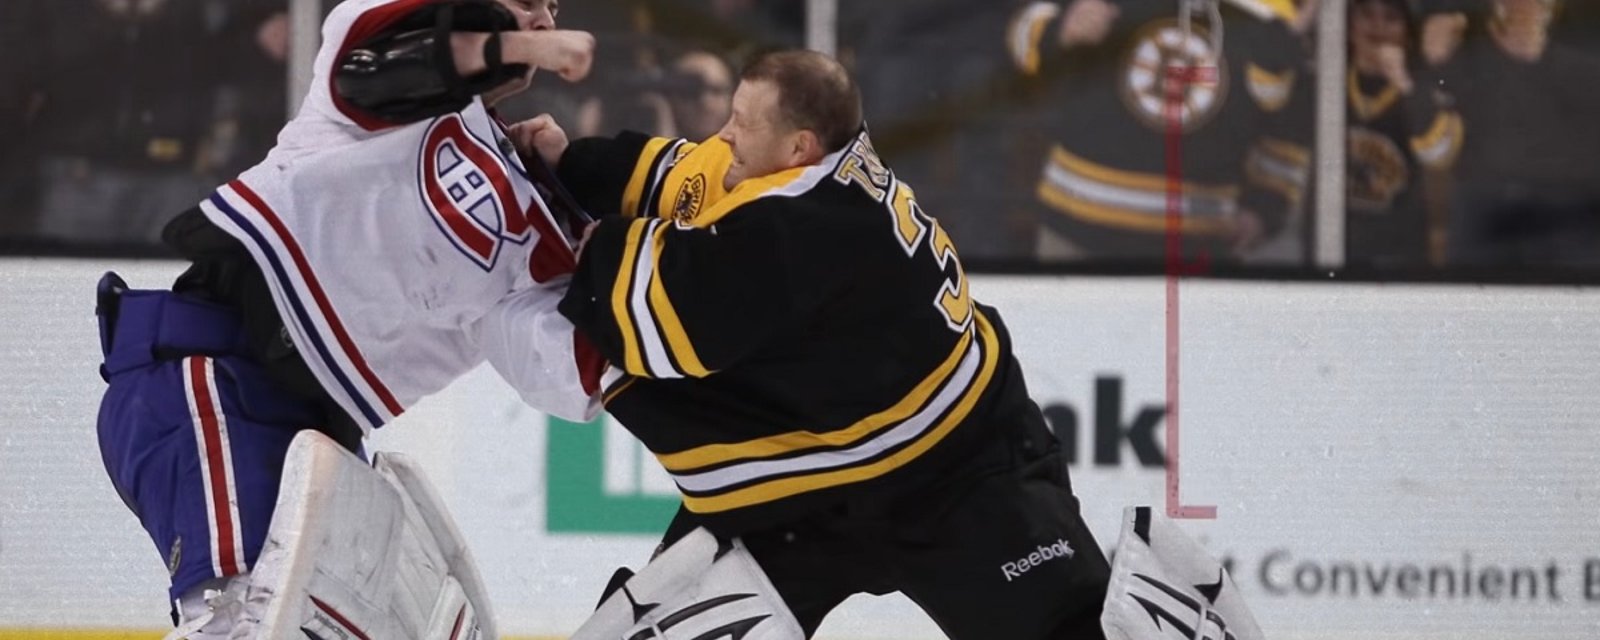 A look at the modern era of hatred between the Habs and Bruins.